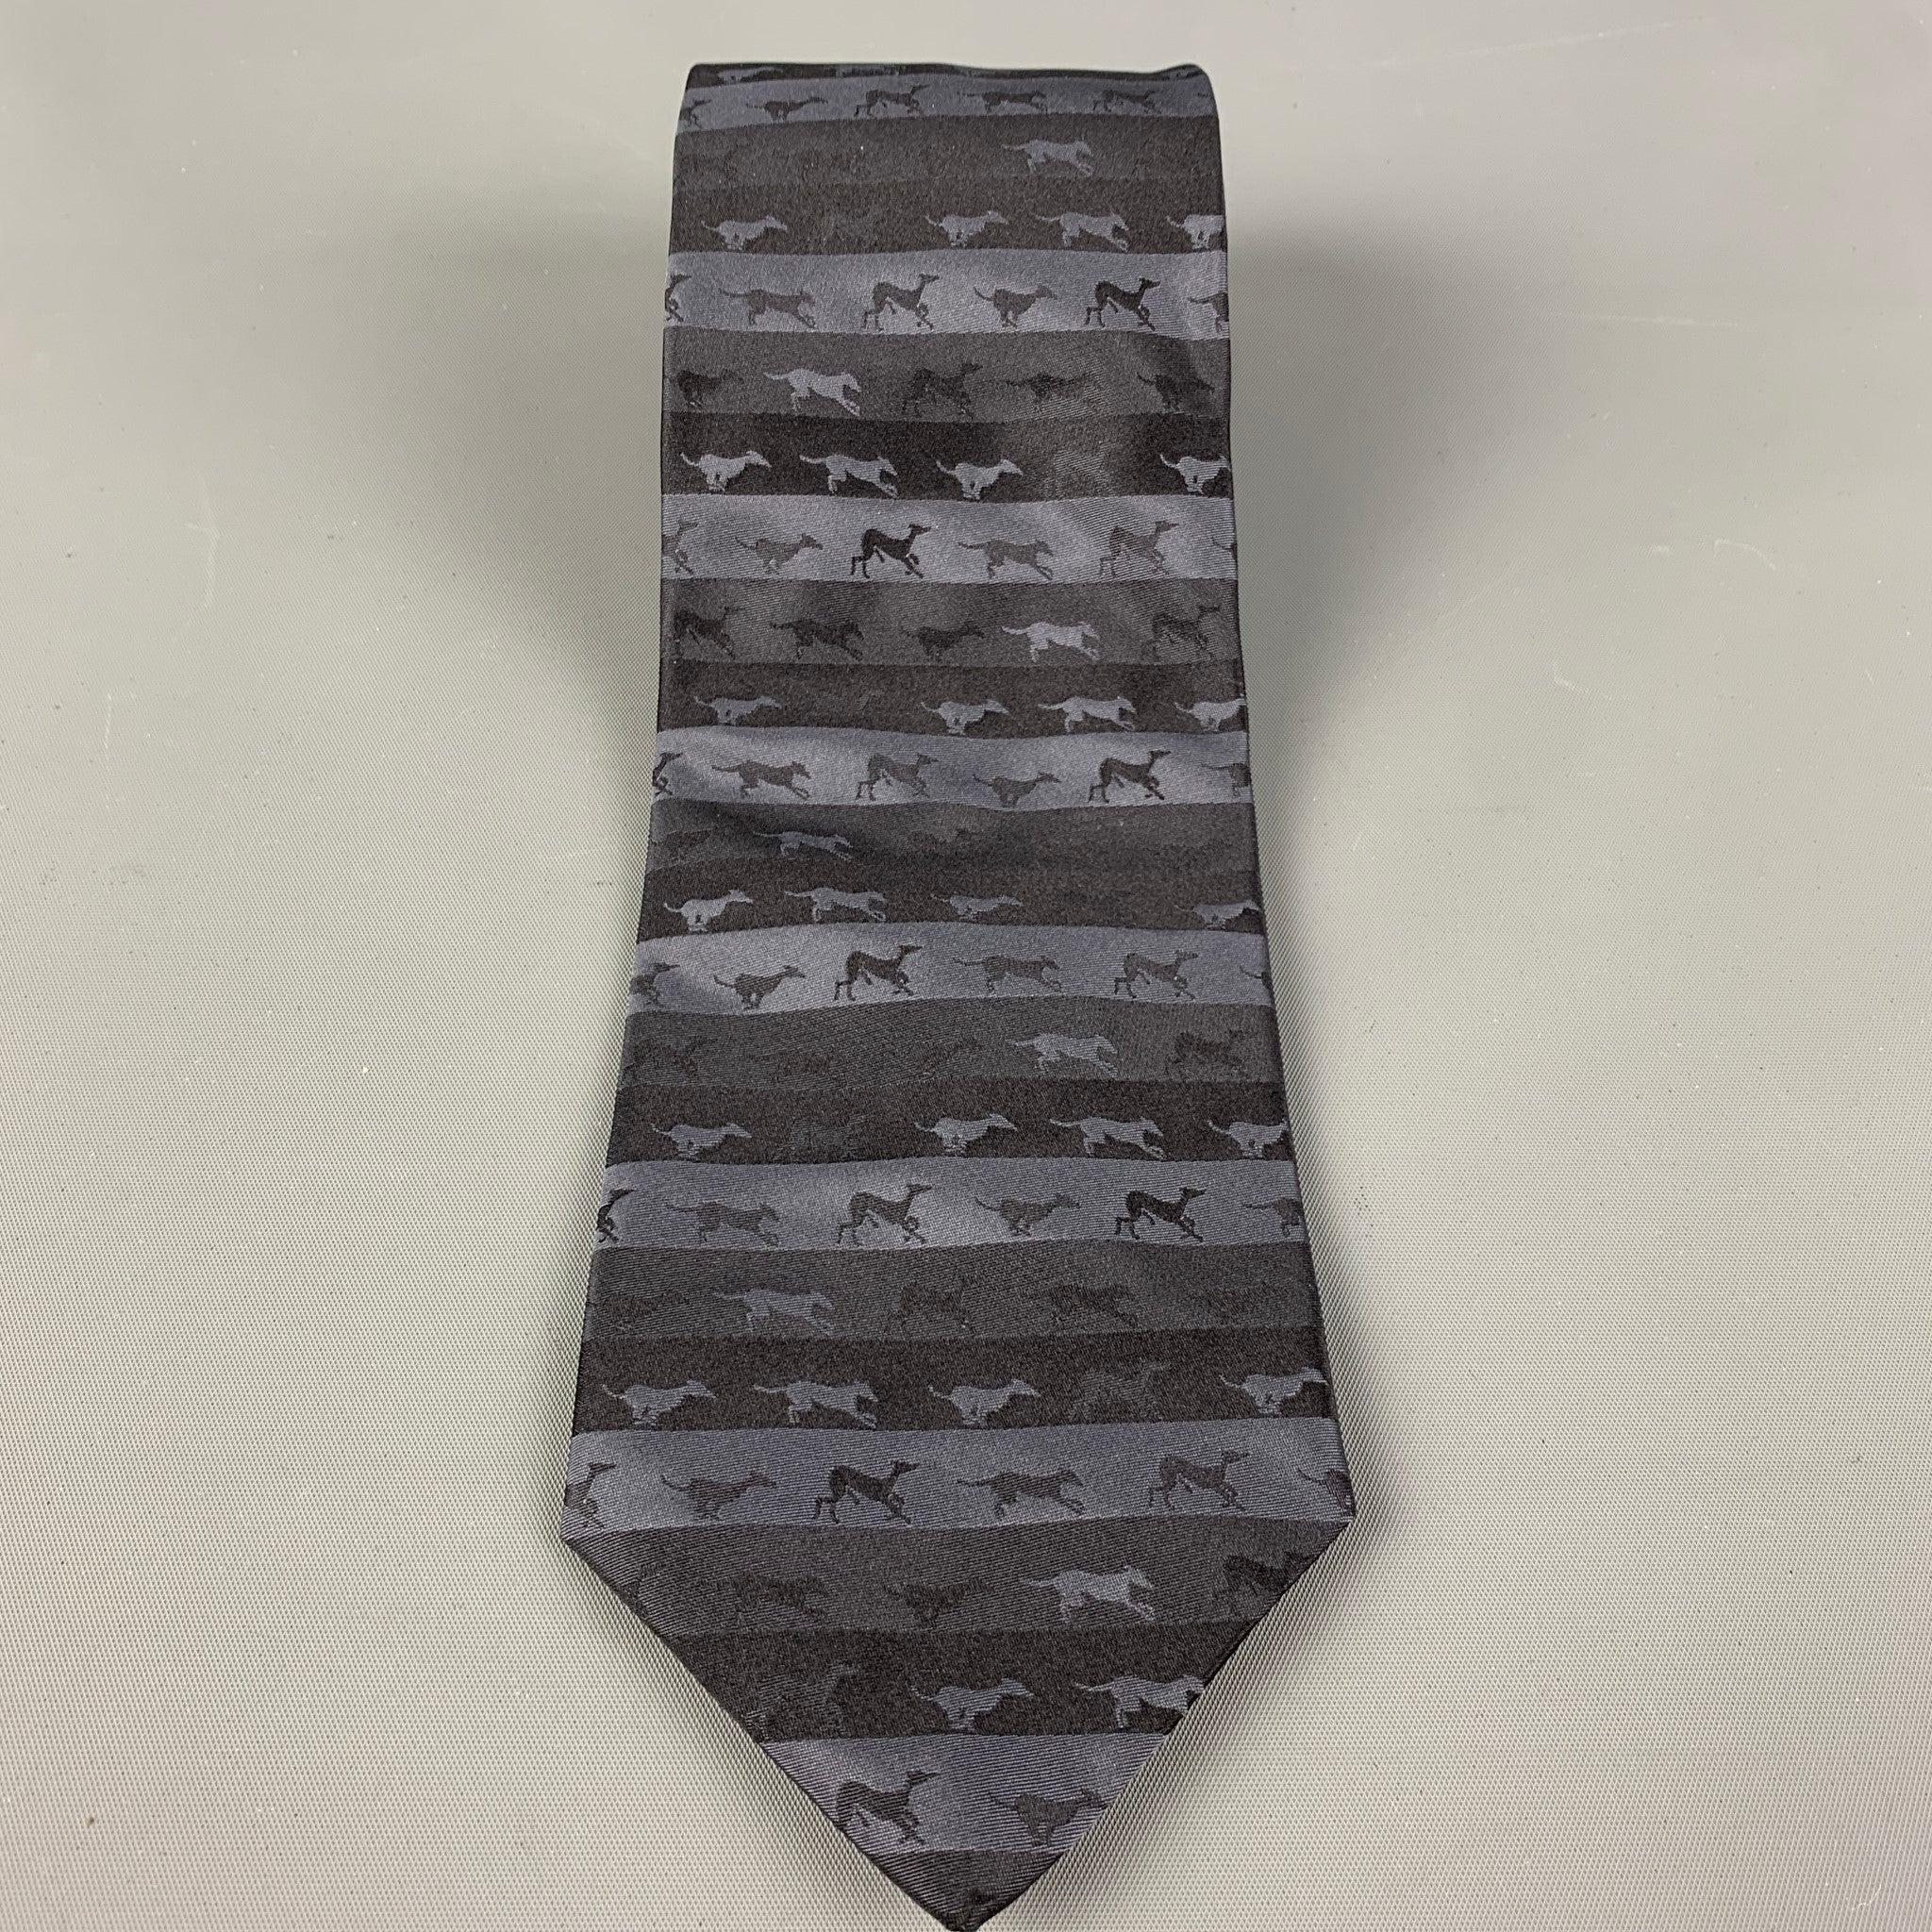 TRUSSARDI black and dark grey necktie offers a striped pattern with running dogs motif.100% silk. Made in Italy .
Very Good Pre-Owned Condition.
 

Measurements: 
  
Width:3 inches 
Length:56 in





  
  
 
Reference: 124872
Category: Tie
More